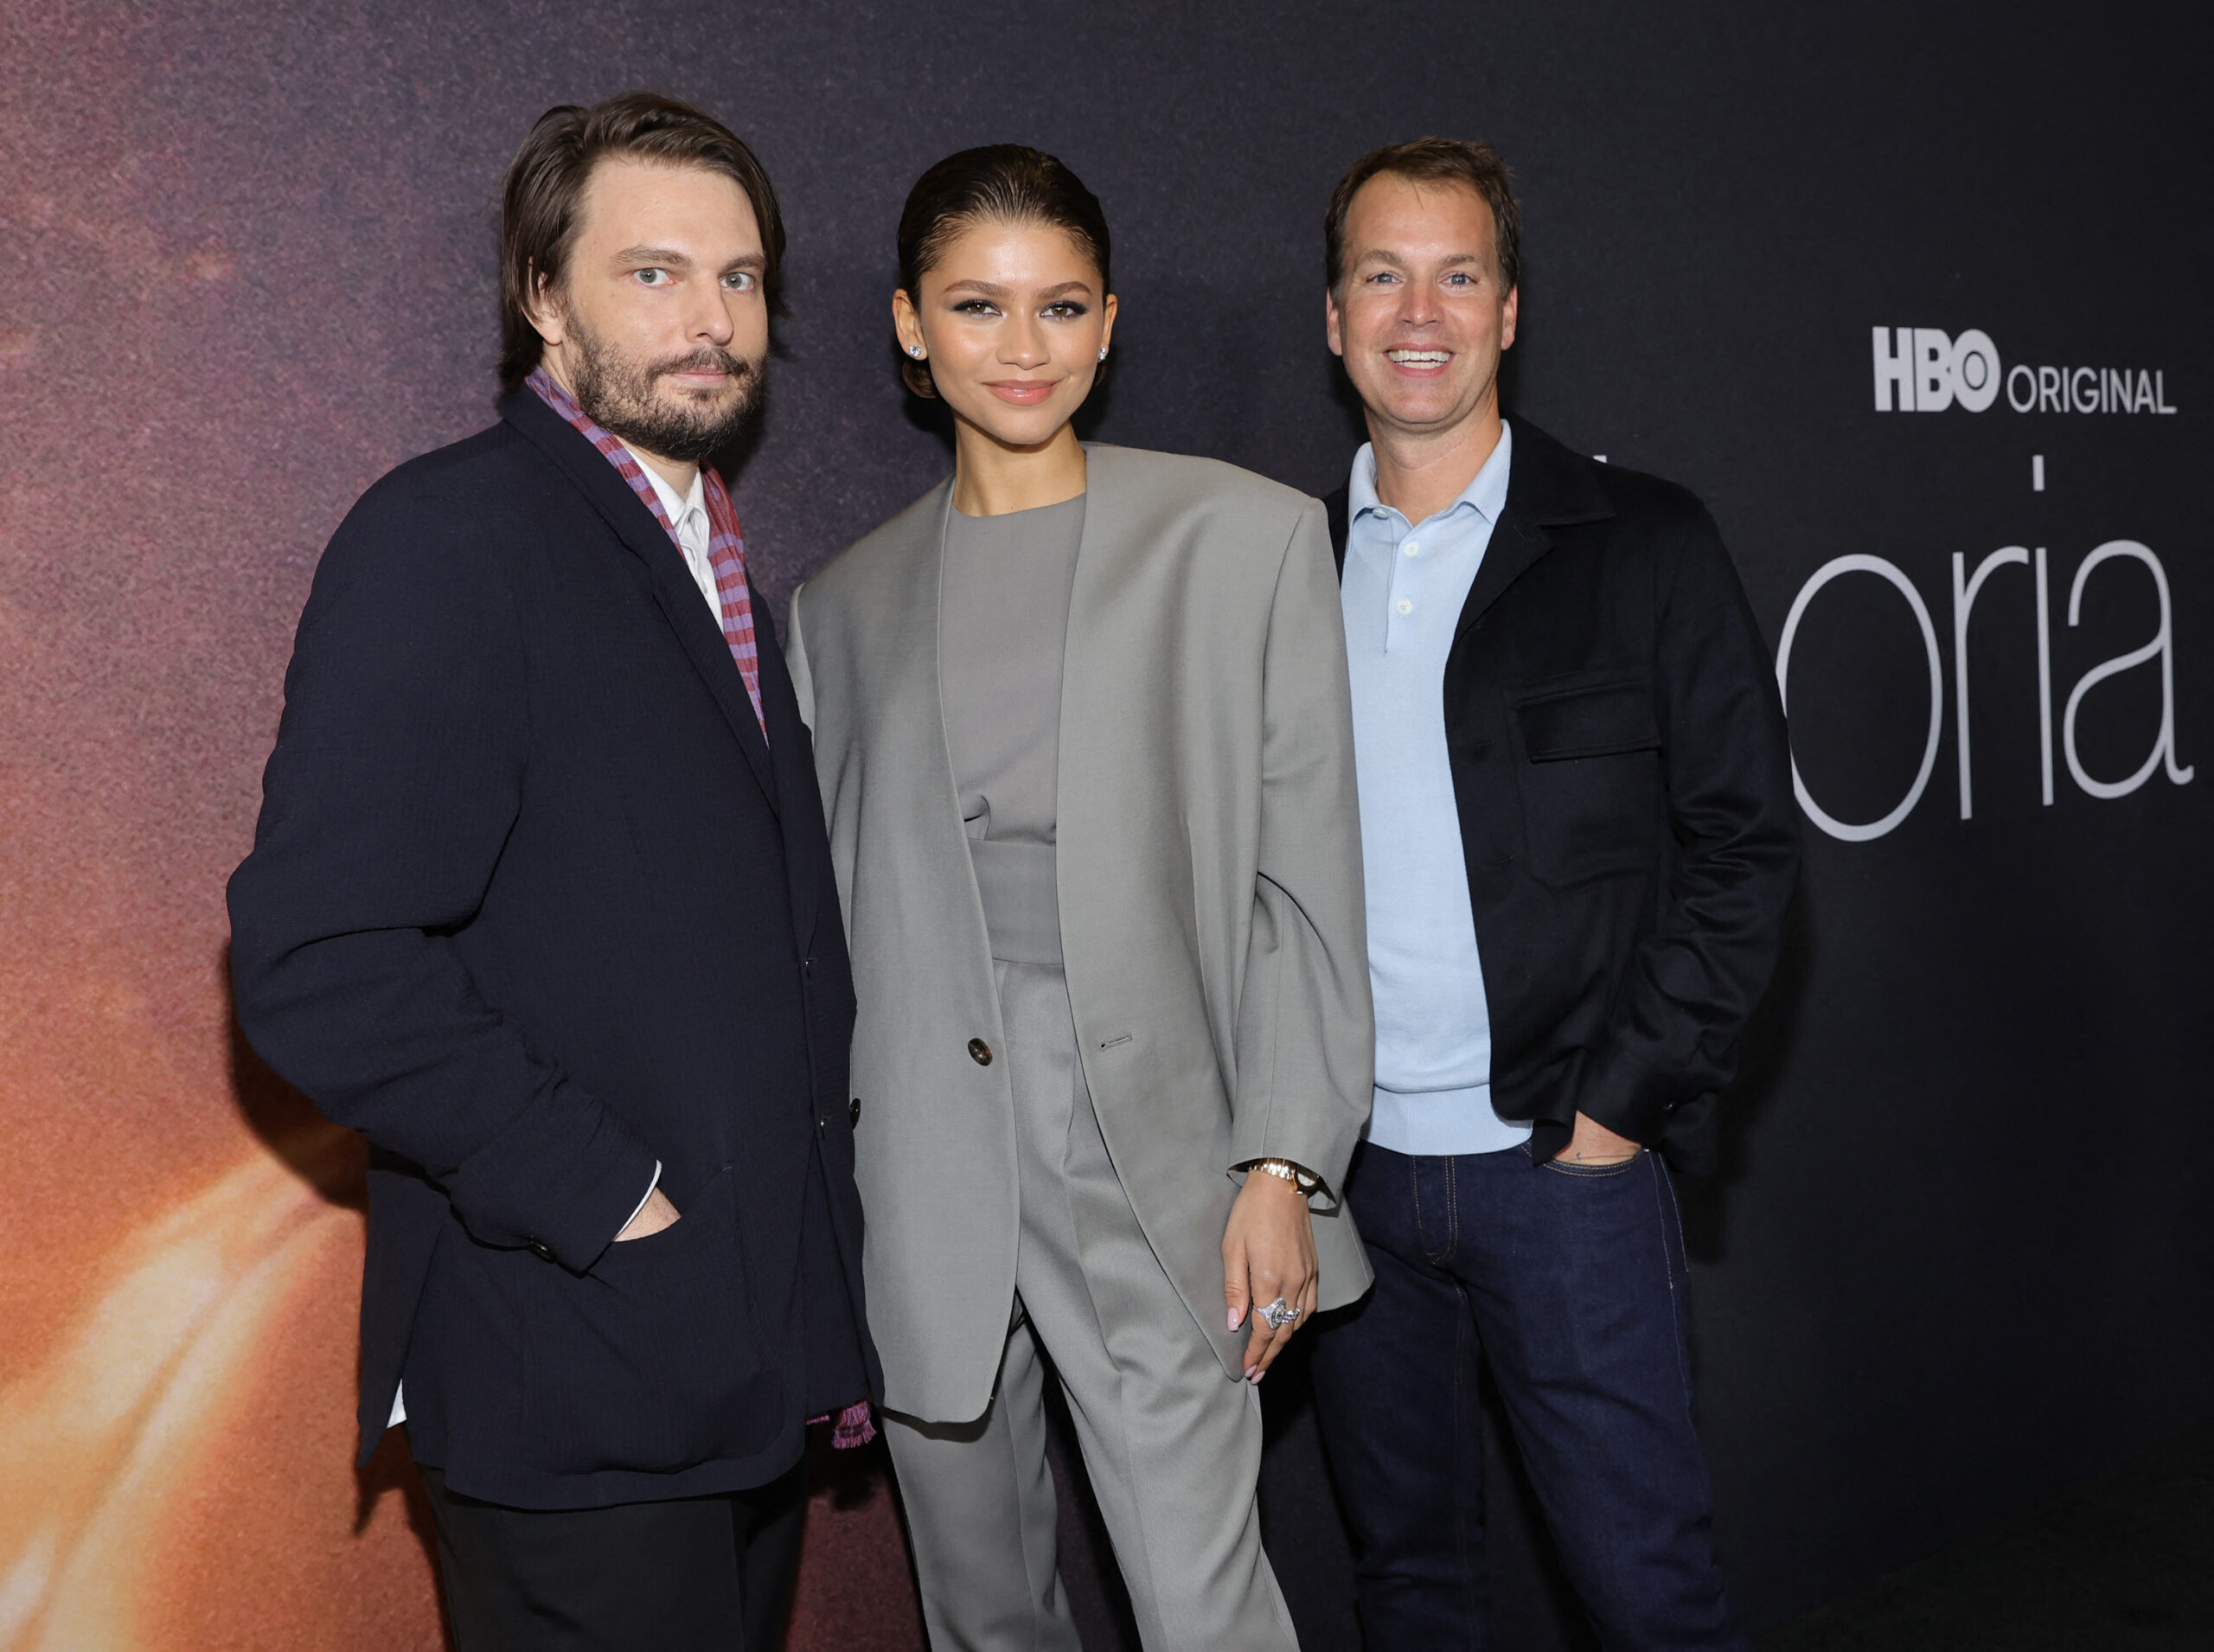 LOS ANGELES, CALIFORNIA - APRIL 20: (L-R) Sam Levinson, Zendaya and Casey Bloys, Chief Content Officer, HBO & HBO Max, attend the HBO Max FYC event for "Euphoria" at Academy Museum of Motion Pictures on April 20, 2022 in Los Angeles, California.   Amy Sussman,Image: 684748720, License: Rights-managed, Restrictions: , Model Release: no, Credit line: Amy Sussman / Getty images / Profimedia